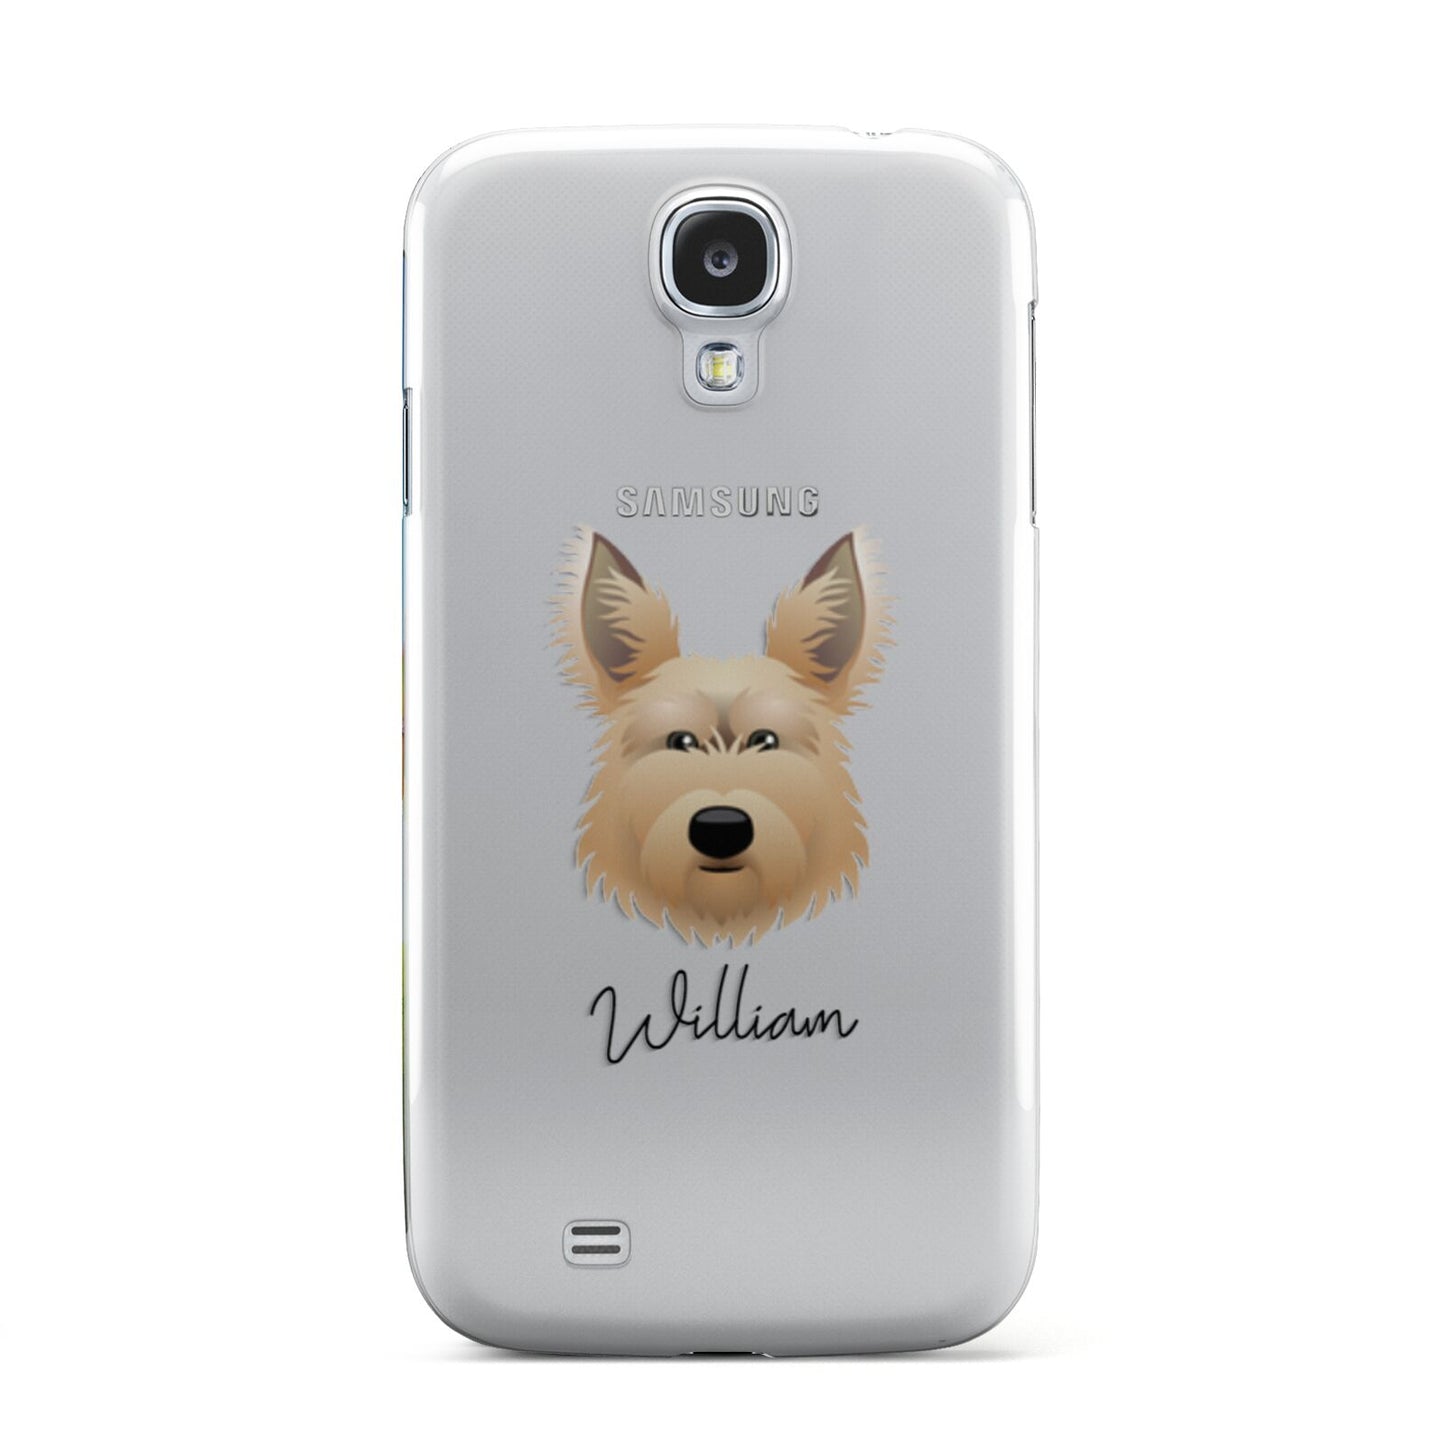 Picardy Sheepdog Personalised Samsung Galaxy S4 Case